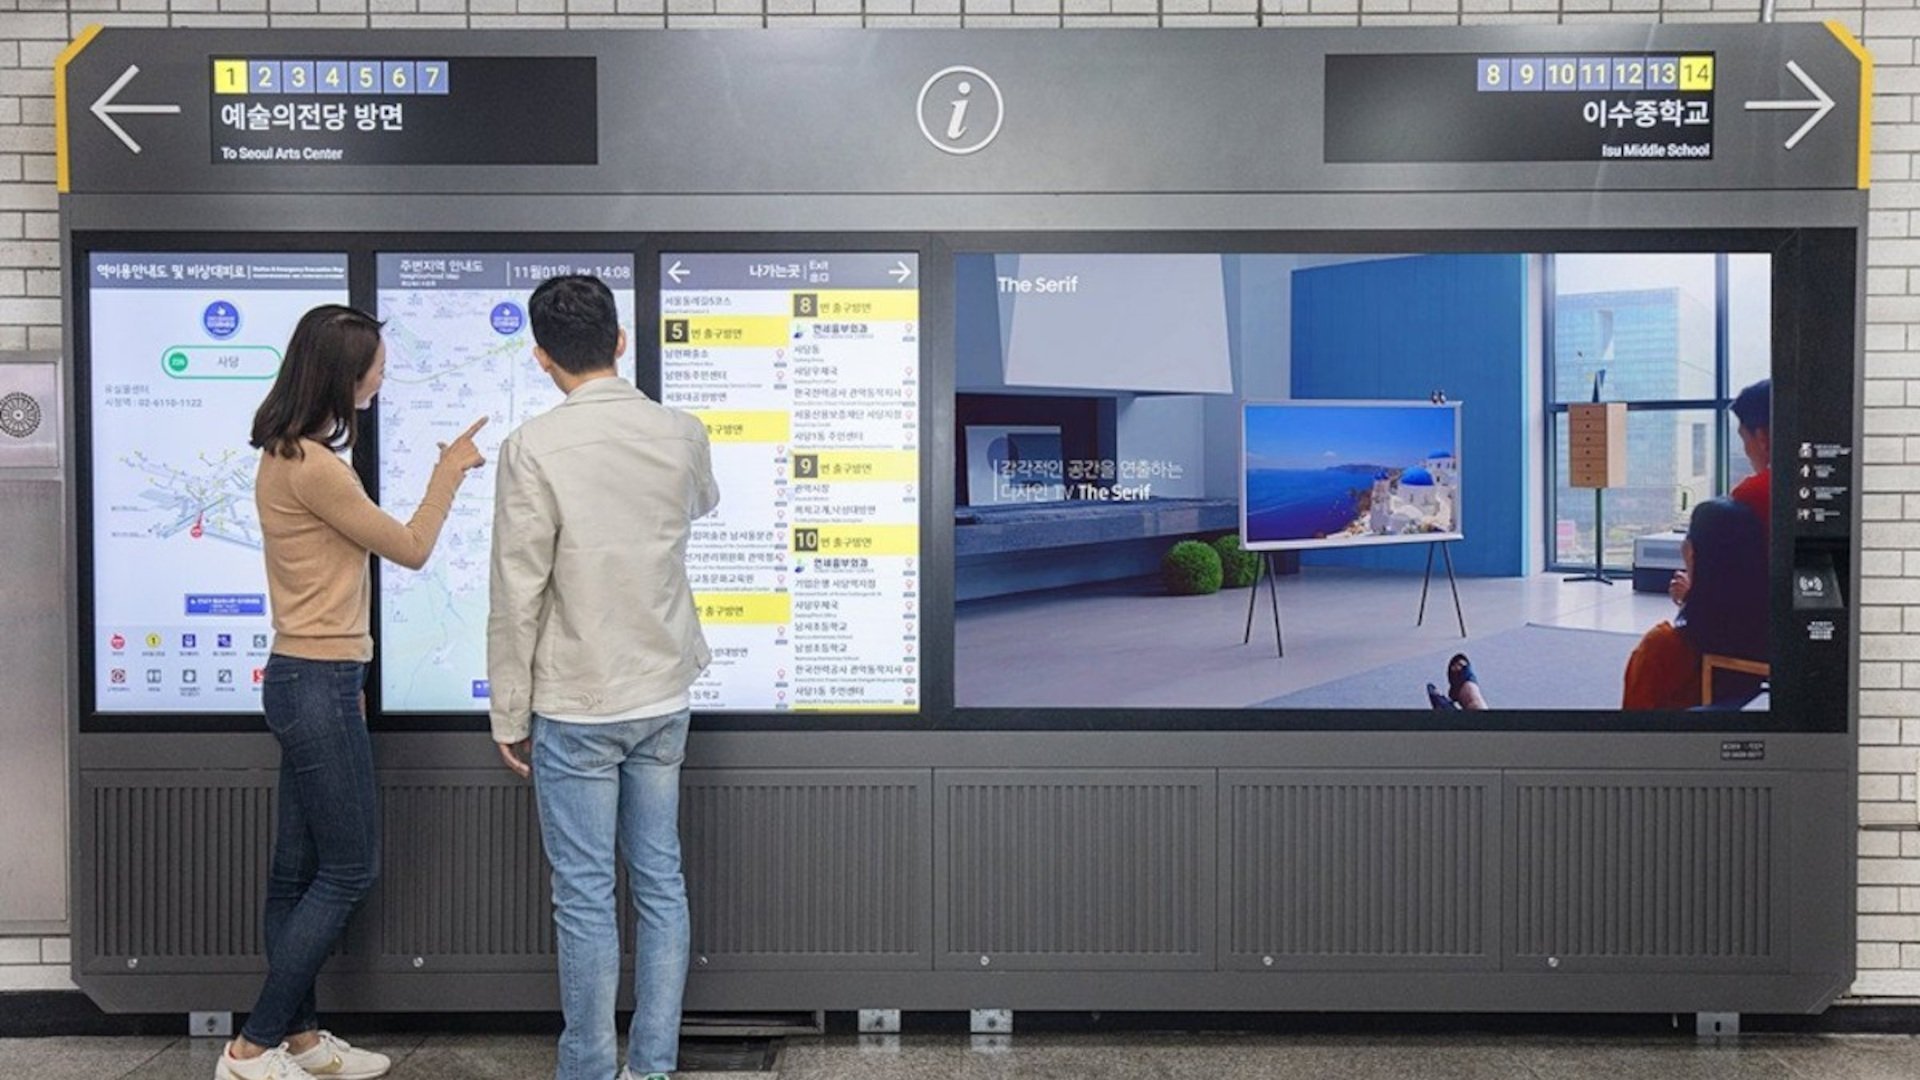 New digital signage for Seoul Metro by Samsung (Photo: Samsung)